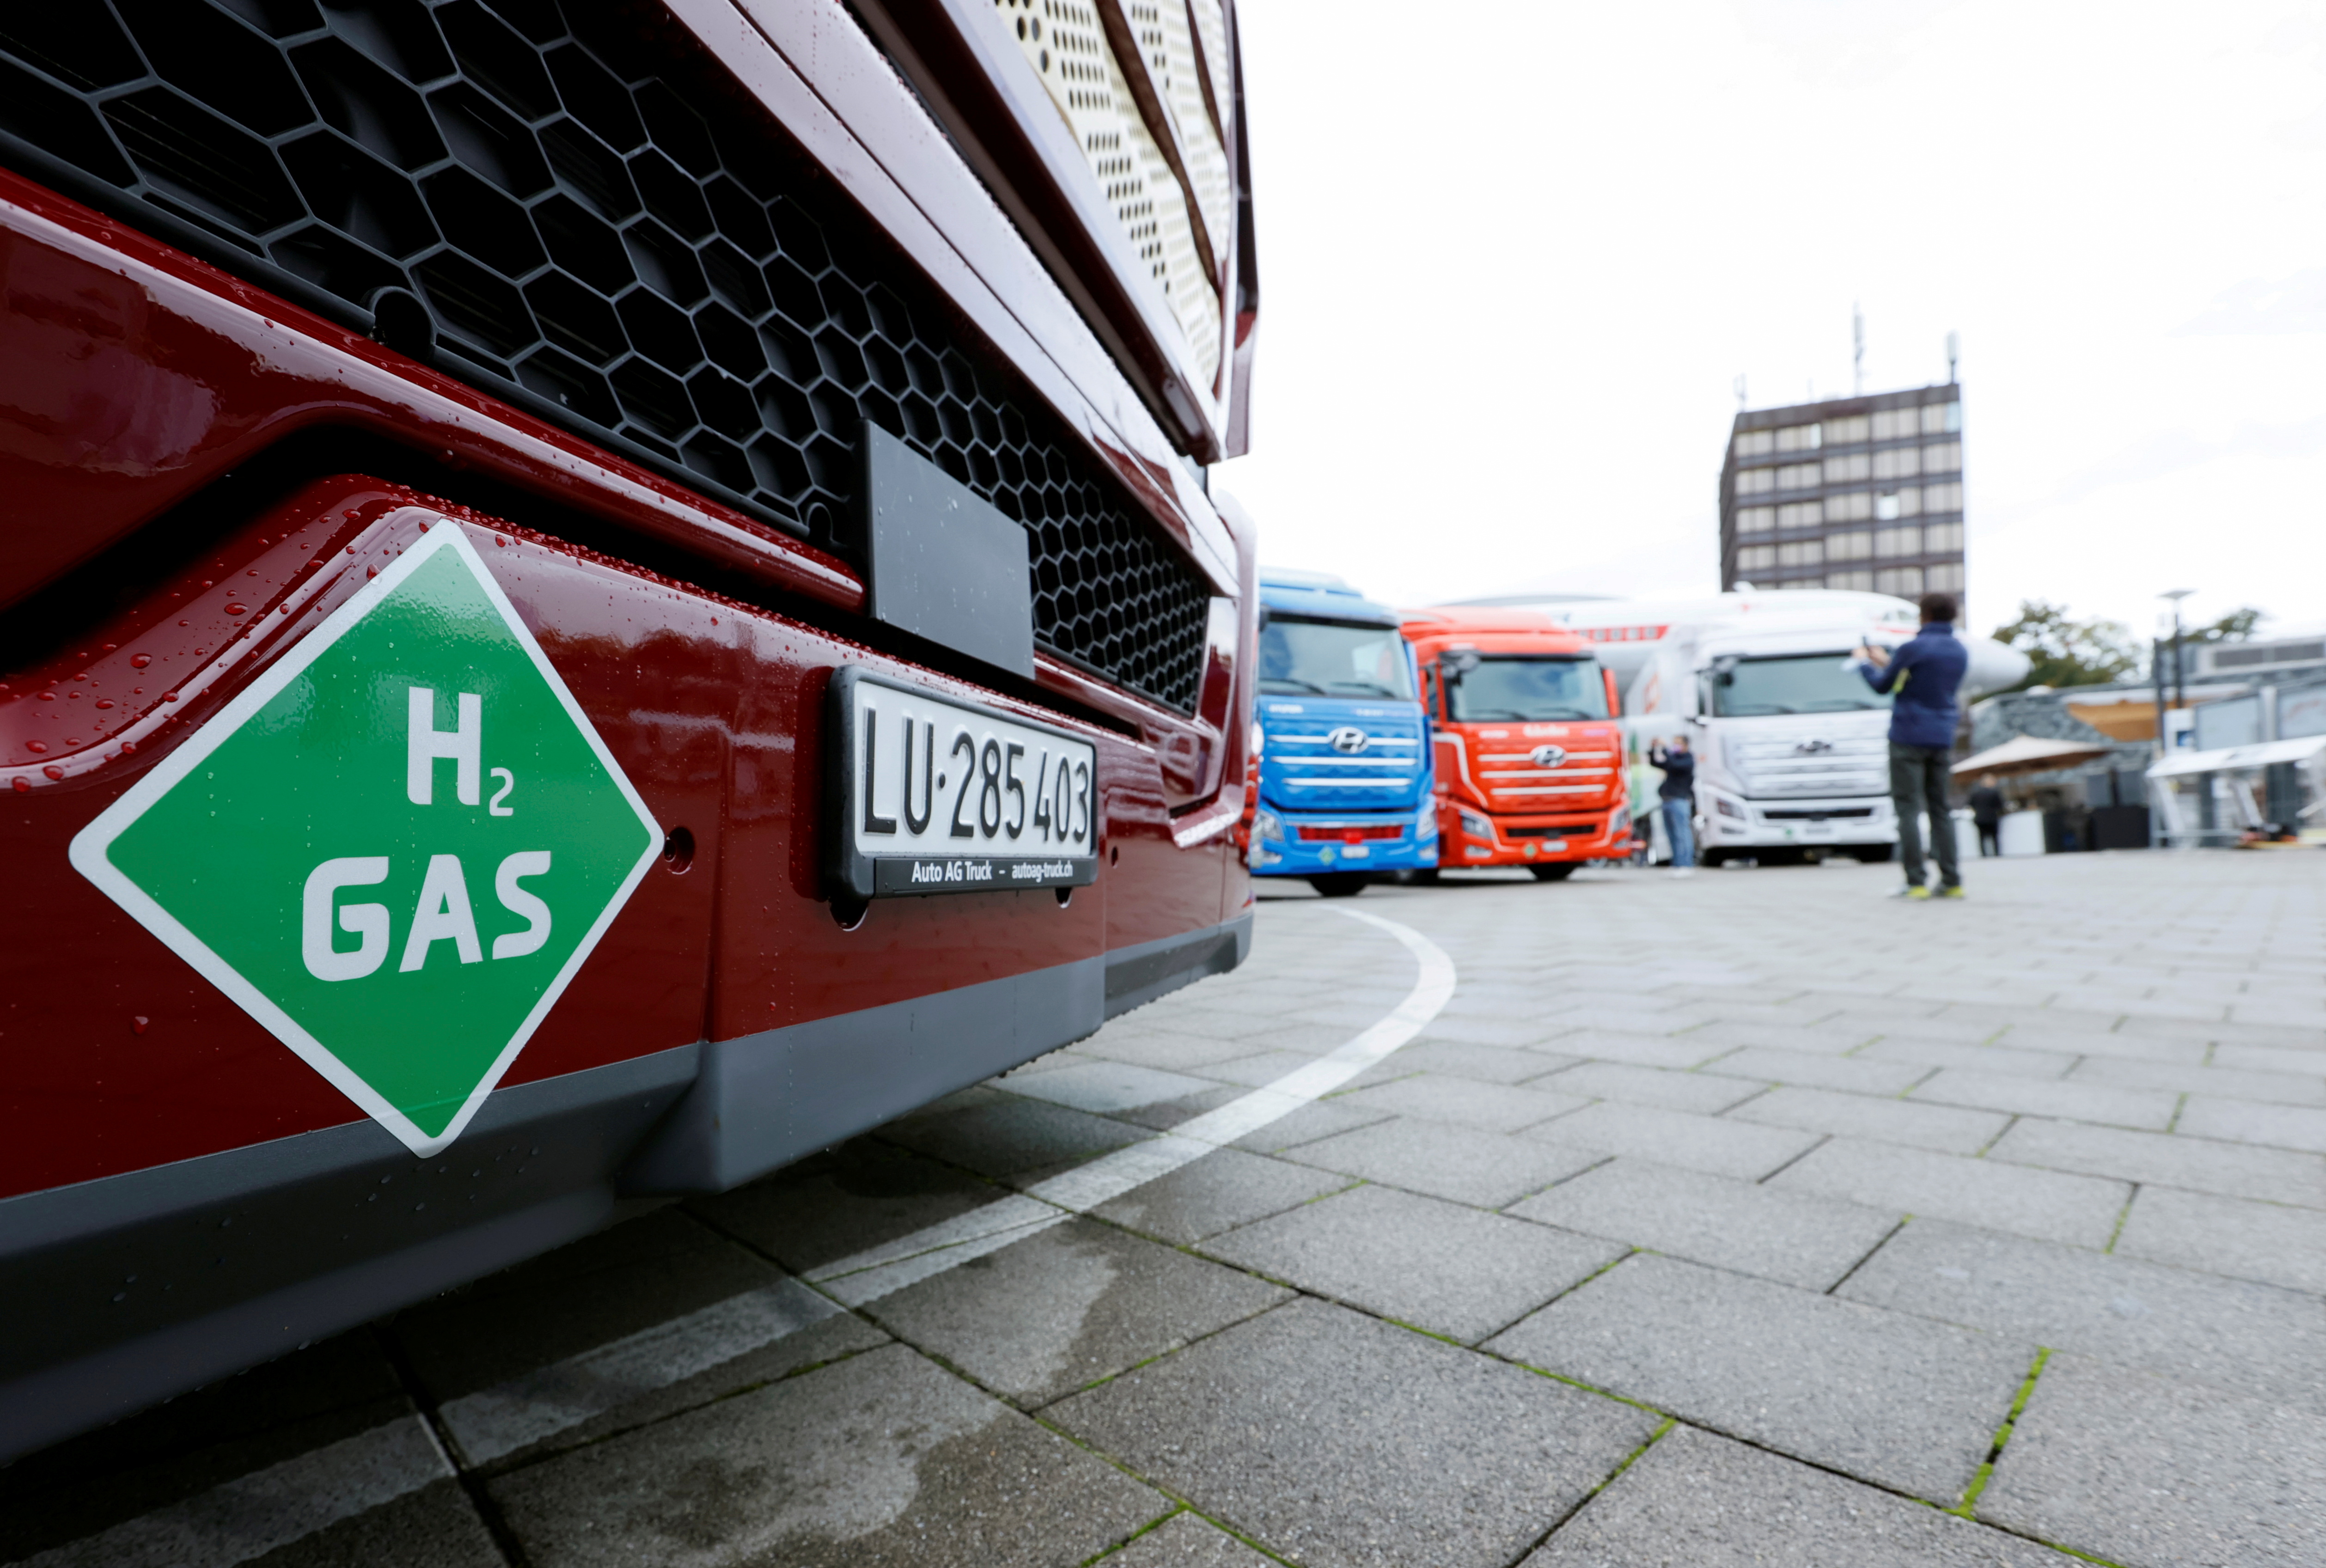 New hydrogen fuel cell truck made by Hyundai is displayed in Luzern